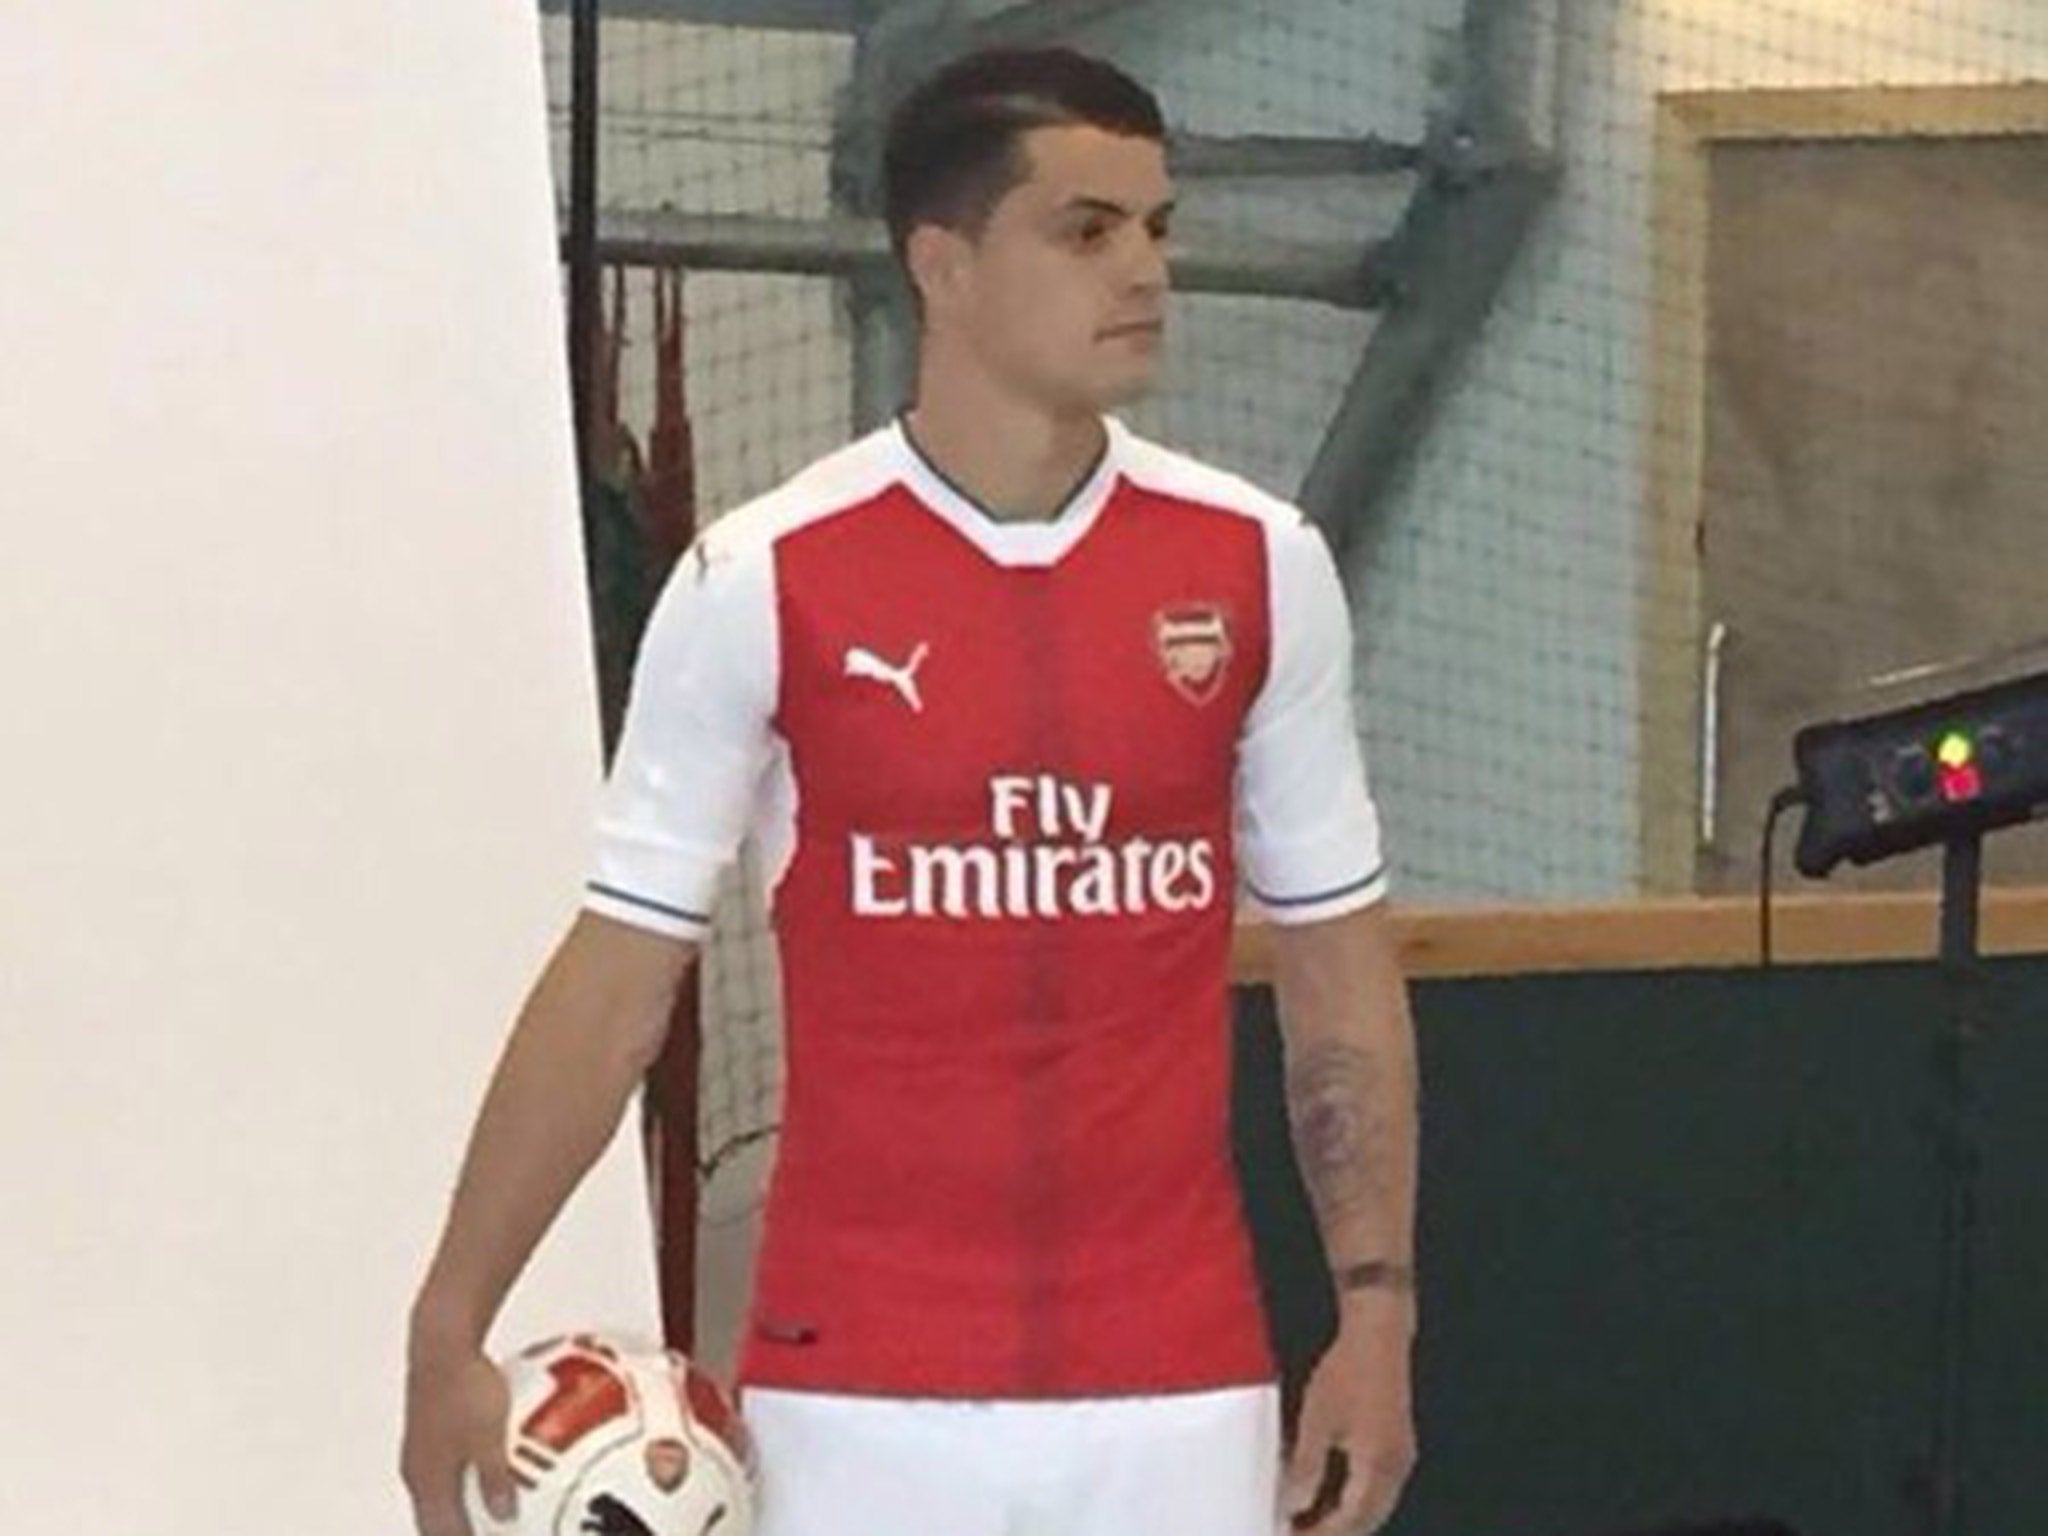 Photos of Granit Xhaka's unveiling as an Arsenal player have been leaked